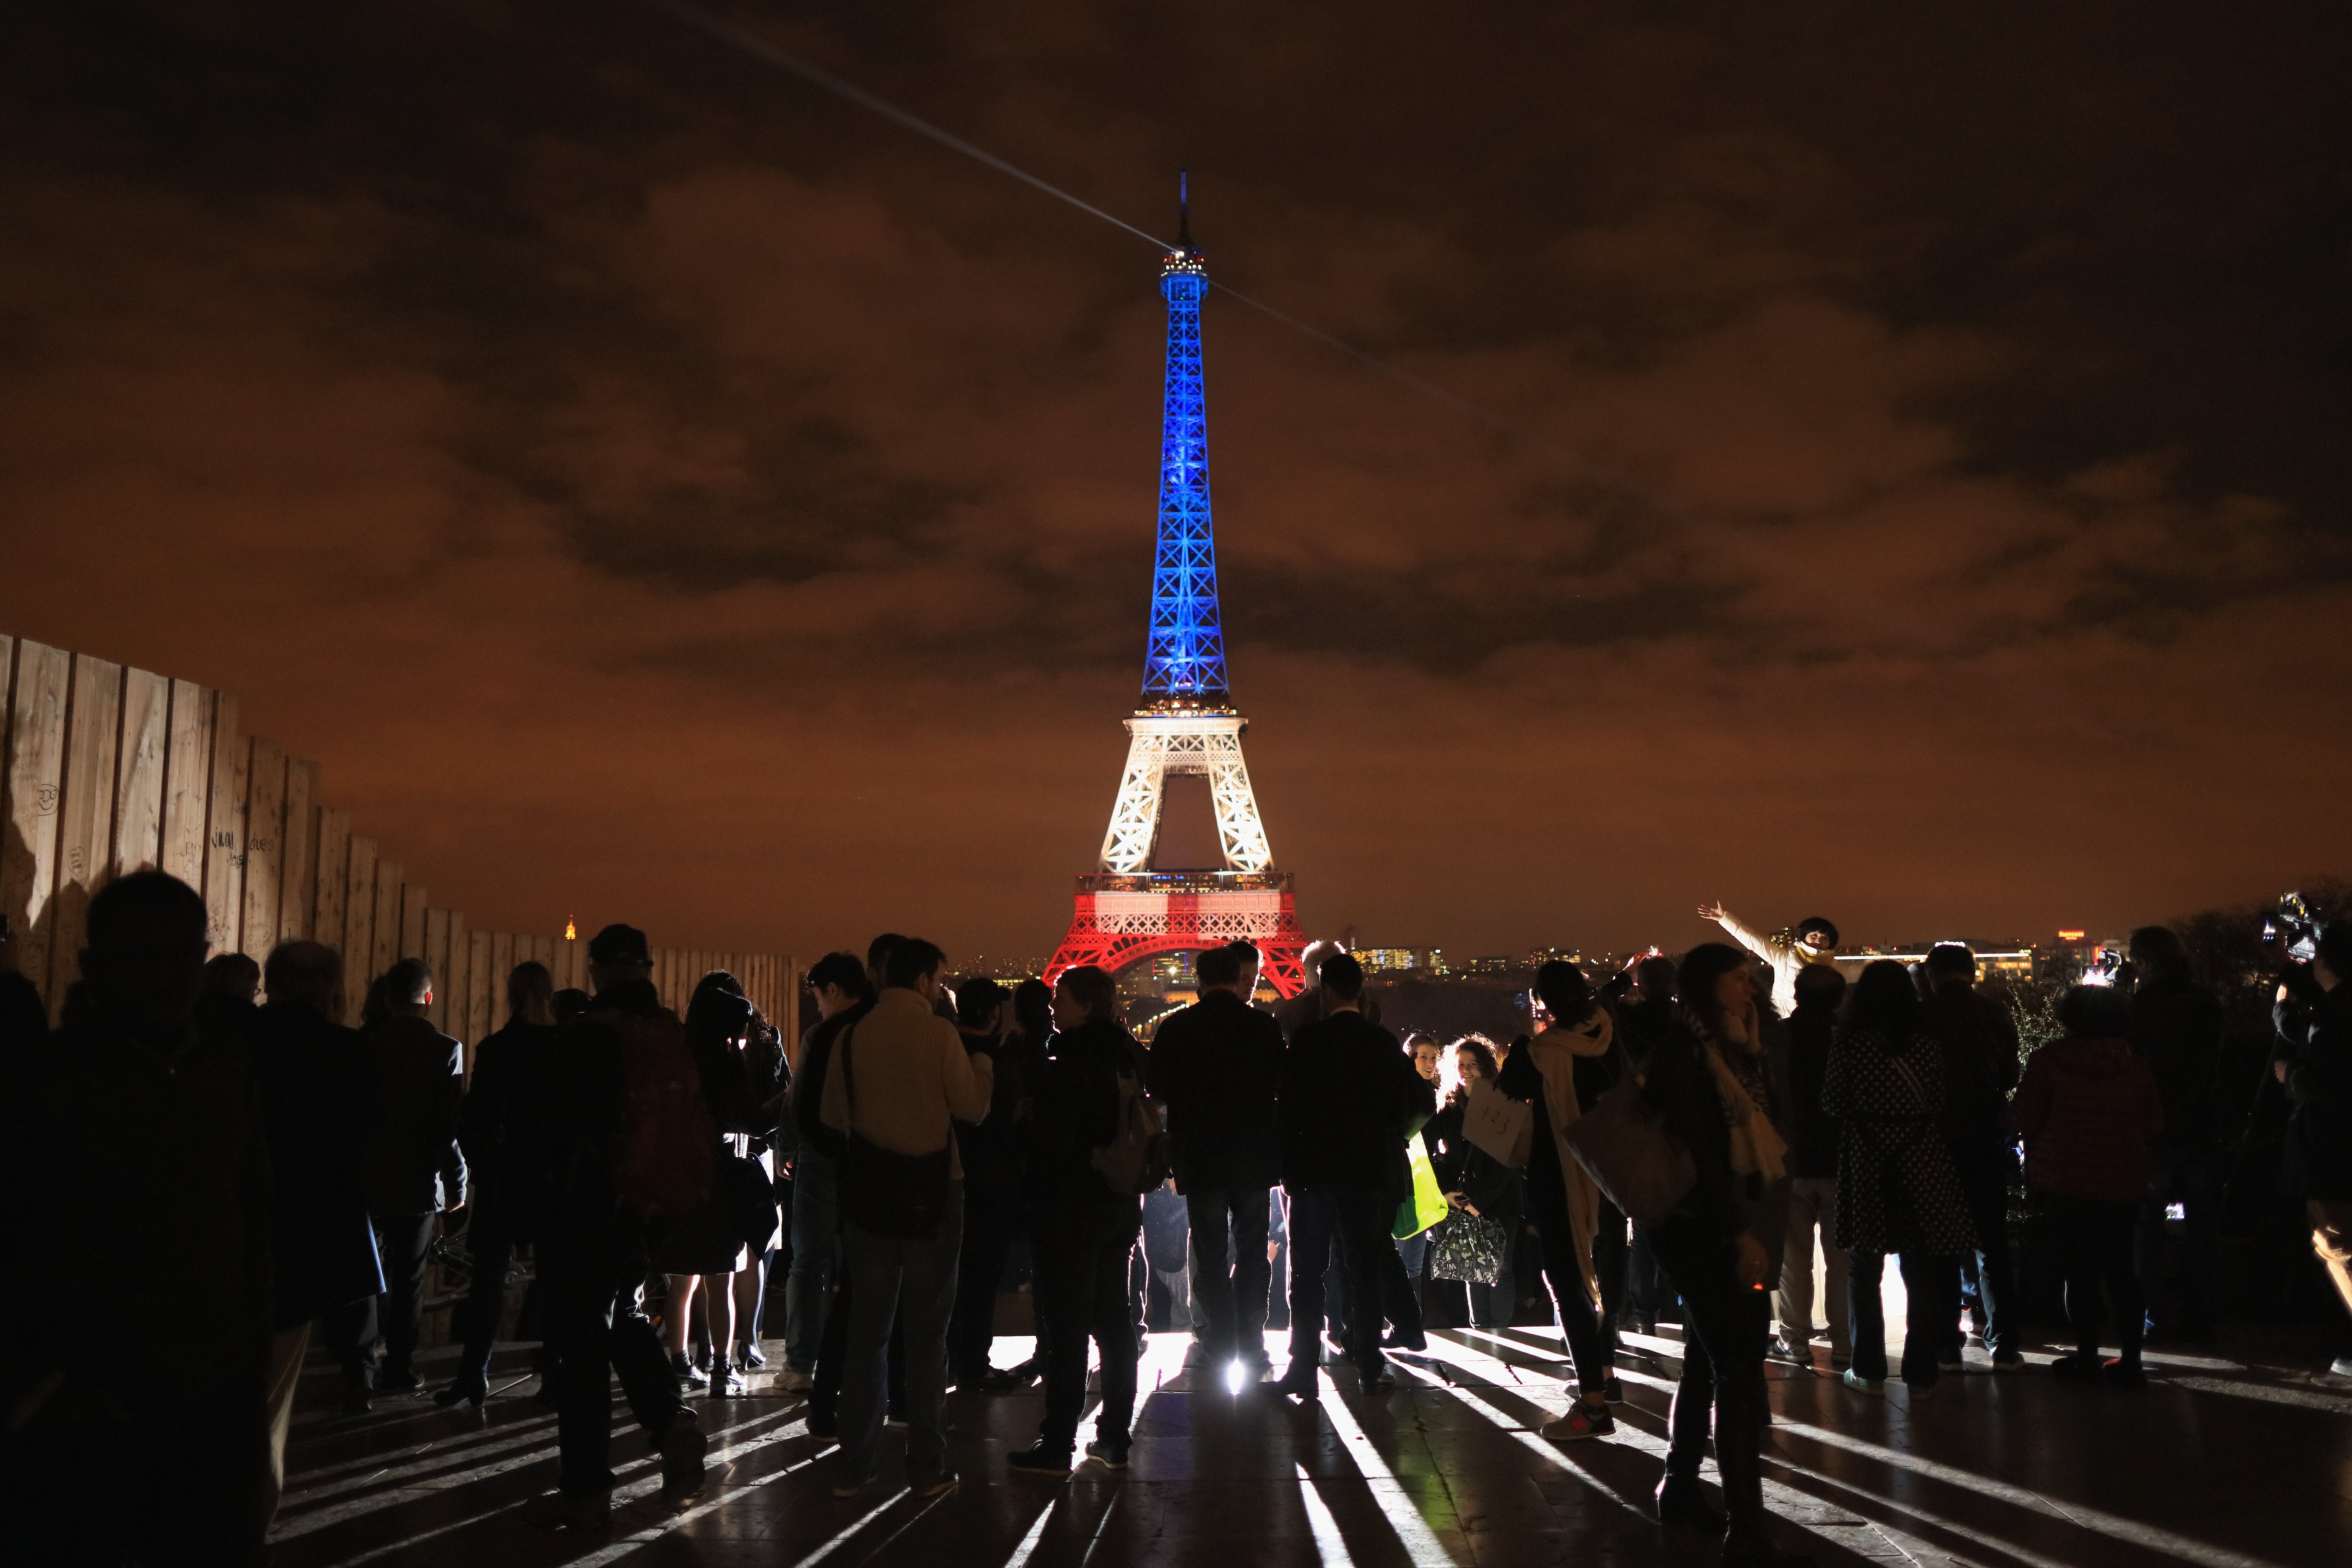 The Eiffel Tower illuminated in Red, White and Blue in honour of the victims of the November 2015 attacks